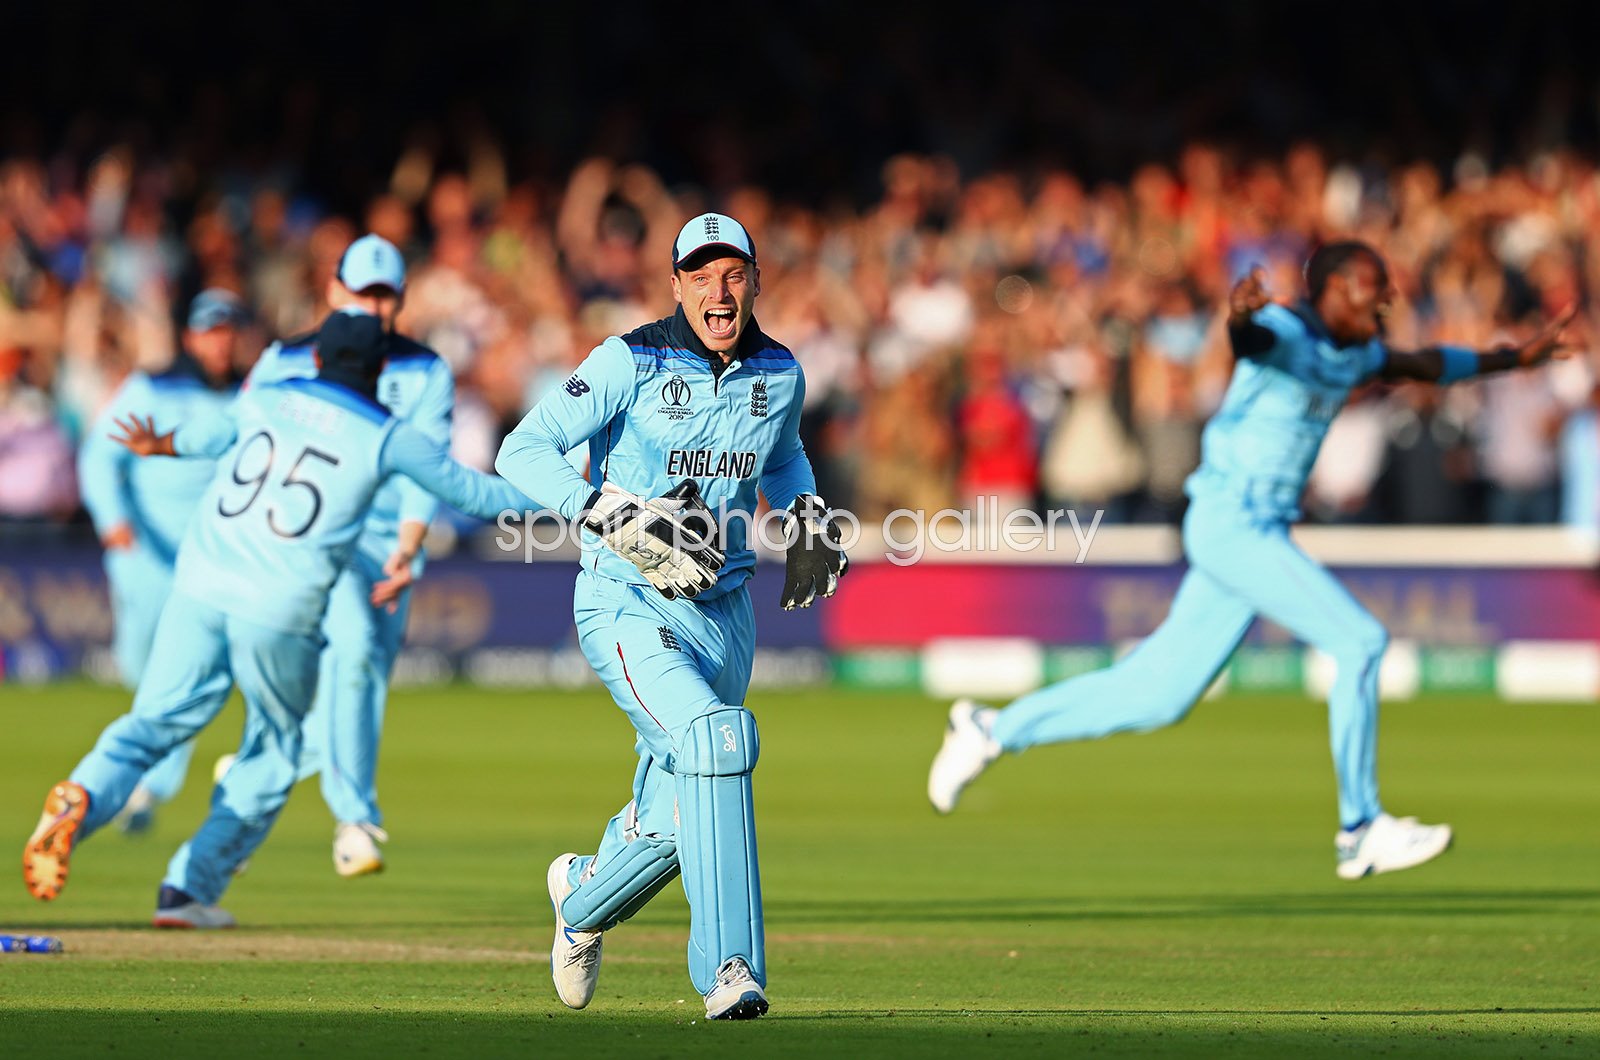 9x6 Andy Evans Photos England Cricket Team ICC World Cup Final Winners 2019 Lords Photograph Print